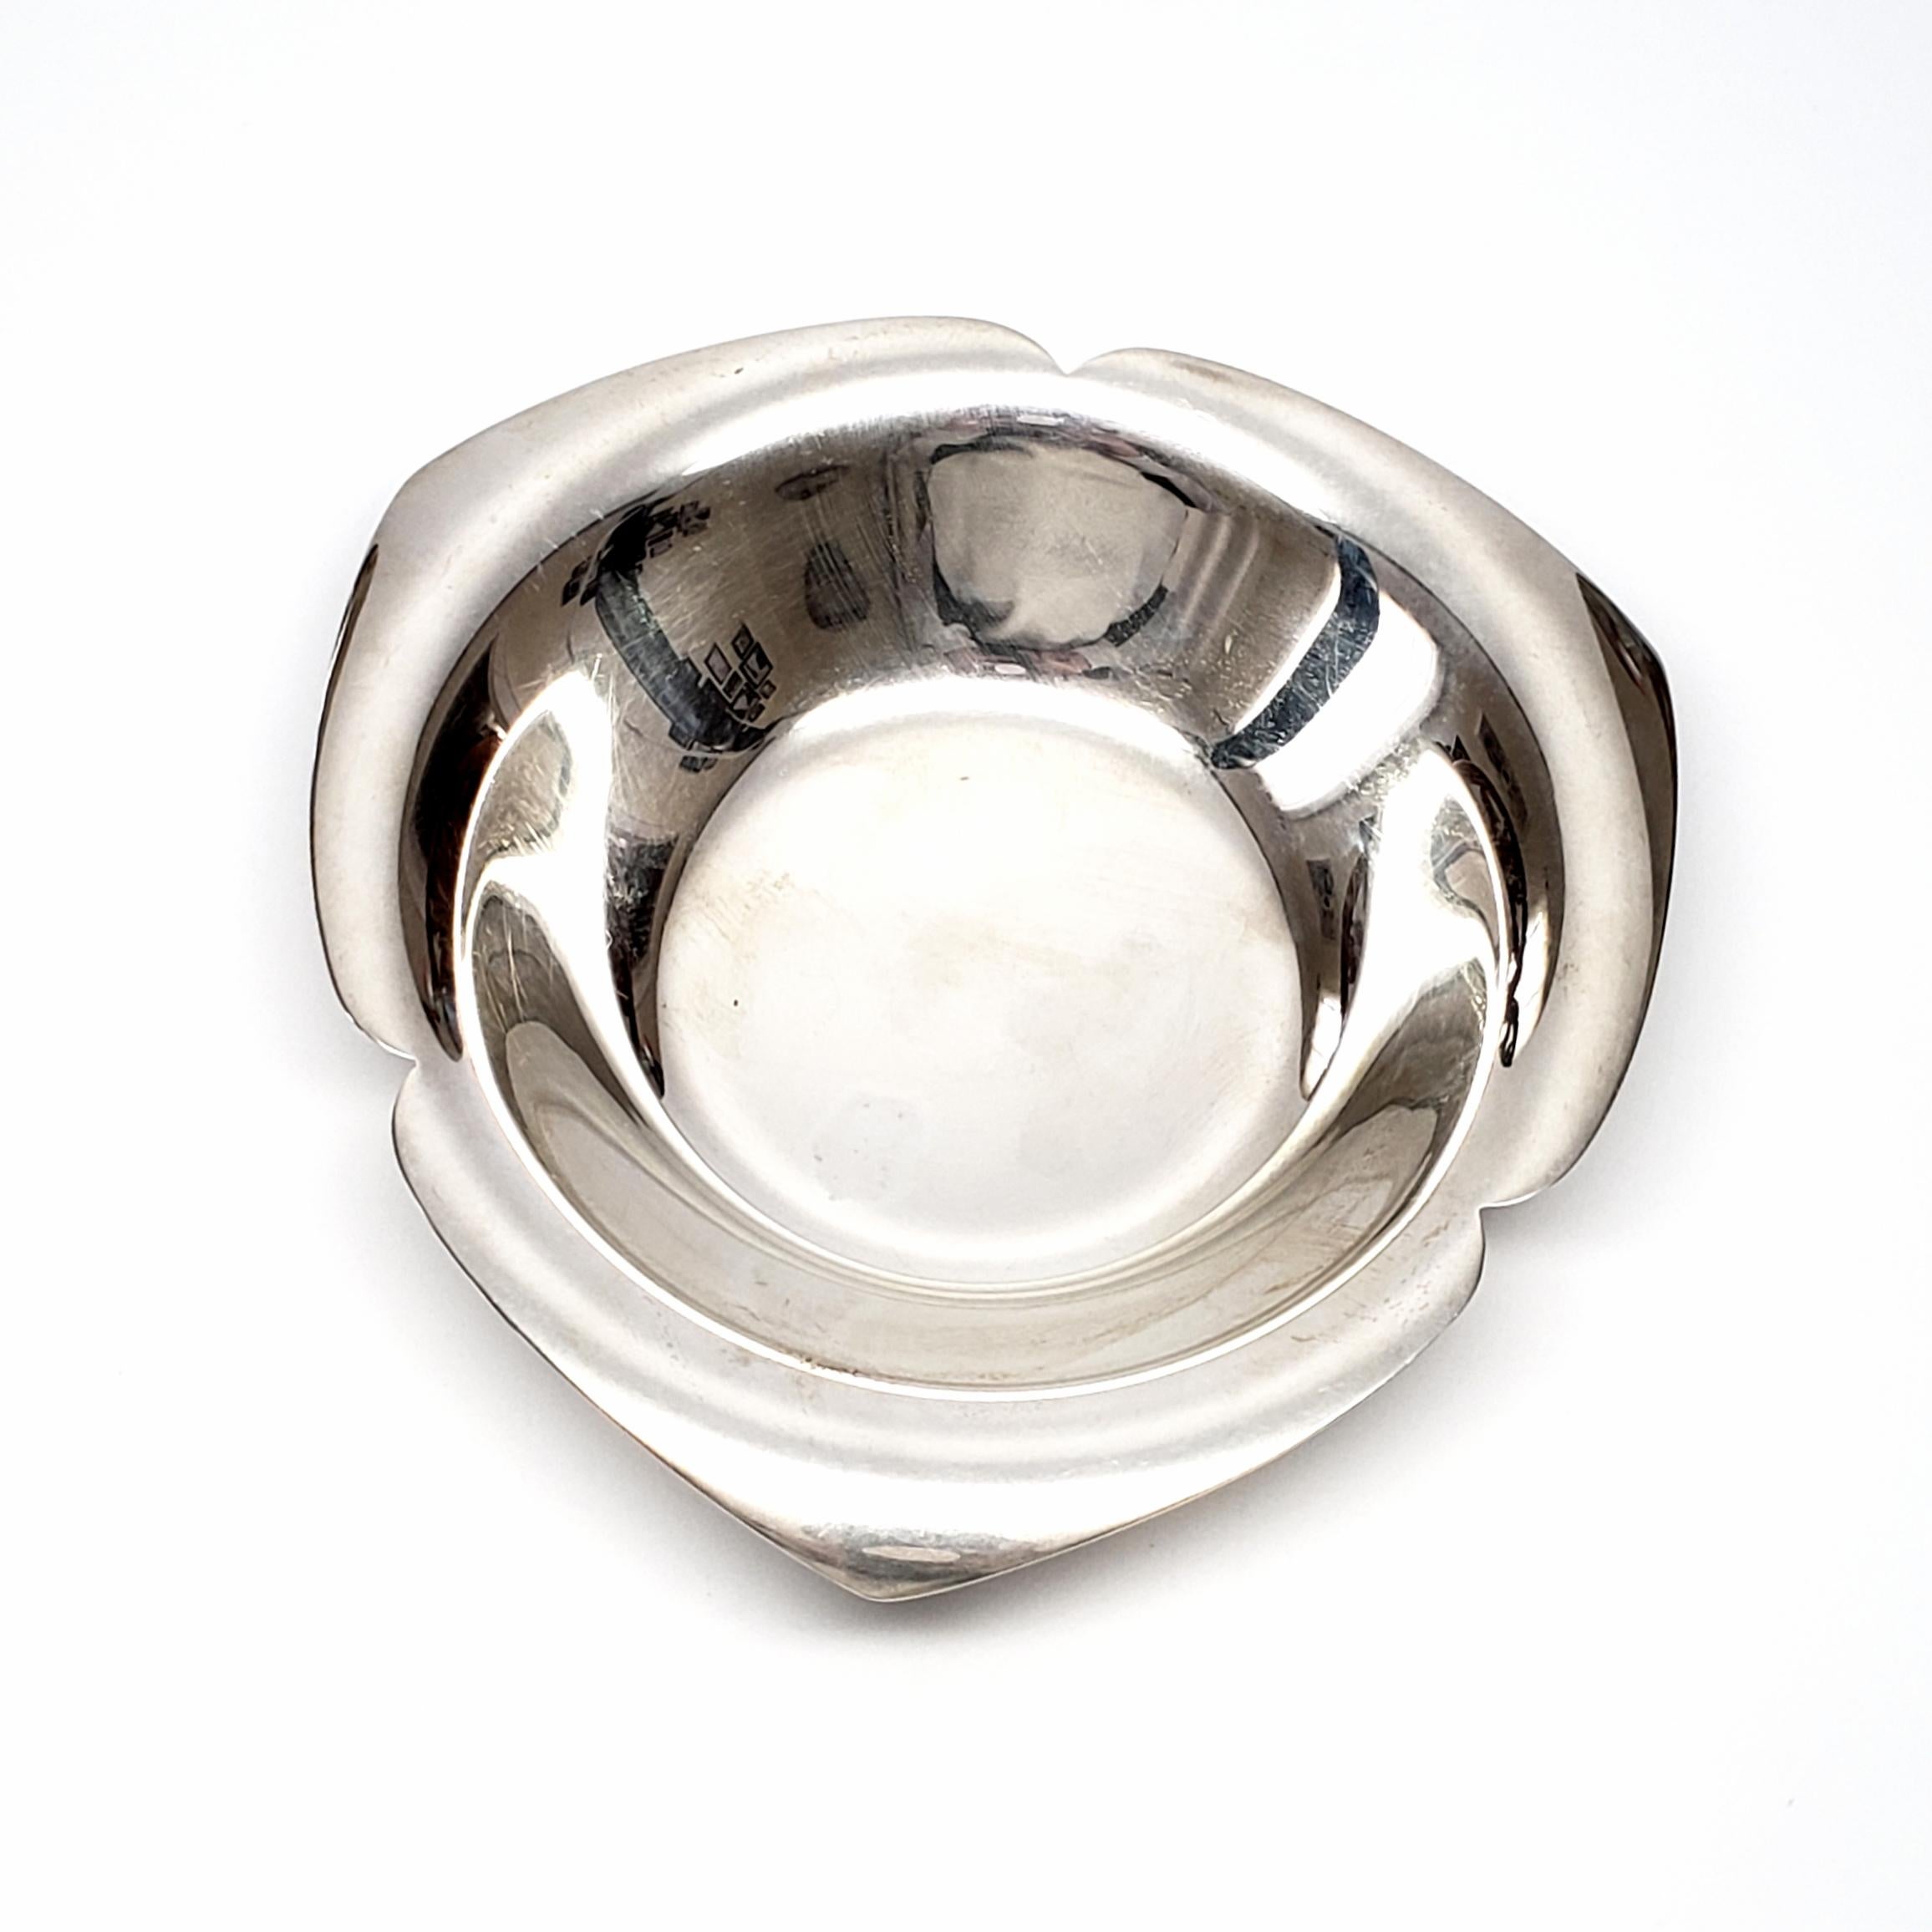 Antique sterling silver Tiffany & Co. nut bowl.

This beautiful bowl can be used for nuts or candy. This bowl has a trefoil-like design, simple lines with rounded points and slightly curled under edges.

Measures approximate 5 1/4